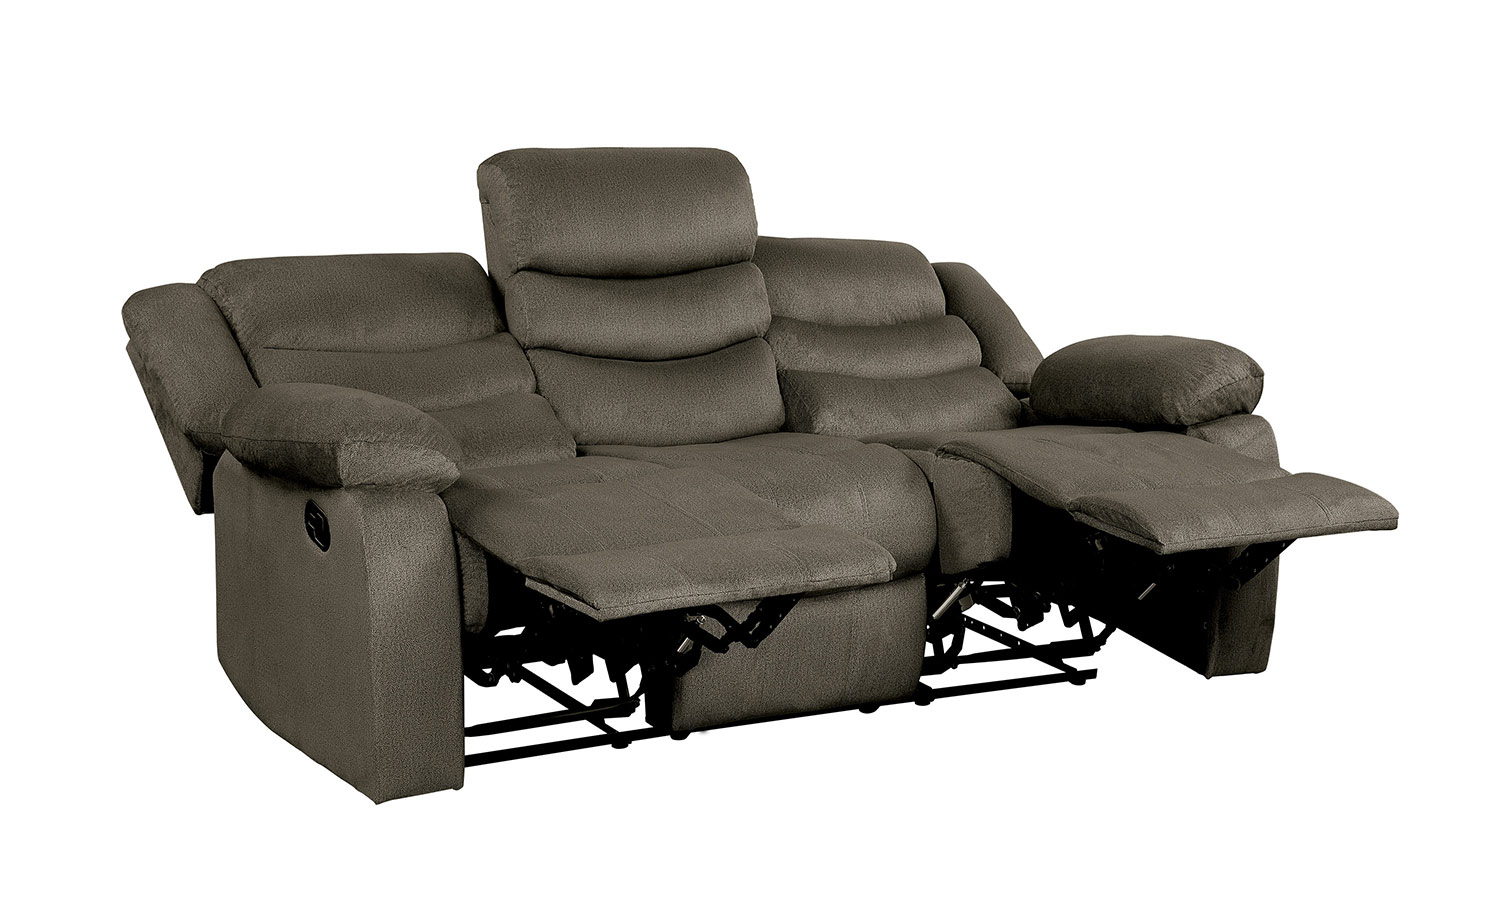 Homelegance Discus Double Reclining Sofa - Brown